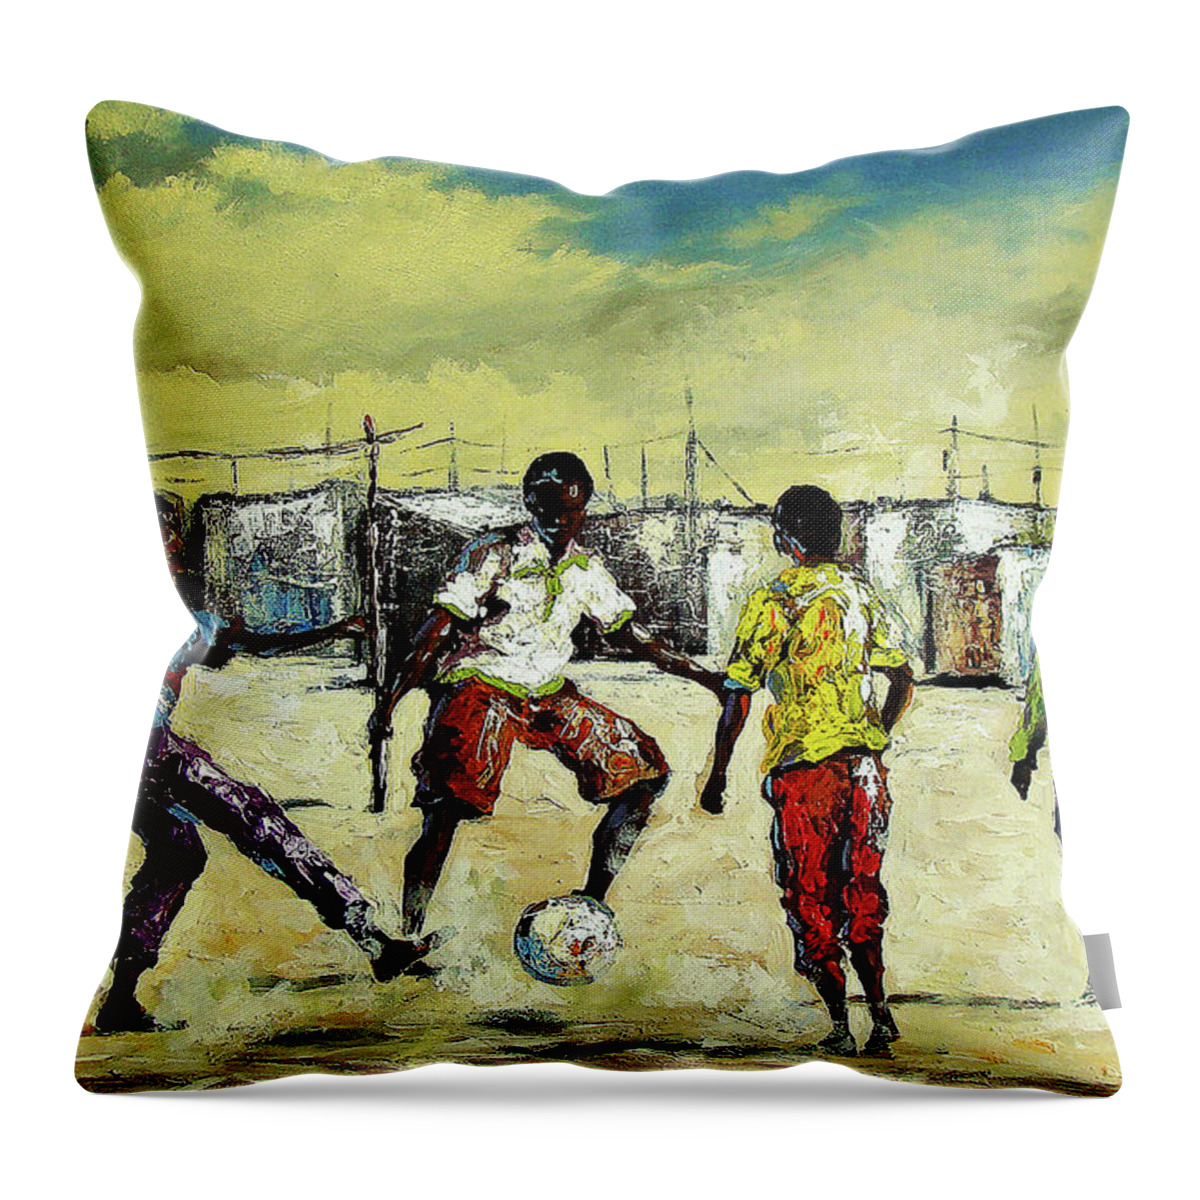  Throw Pillow featuring the painting Tomorrow's Dreams by Berthold Moyo